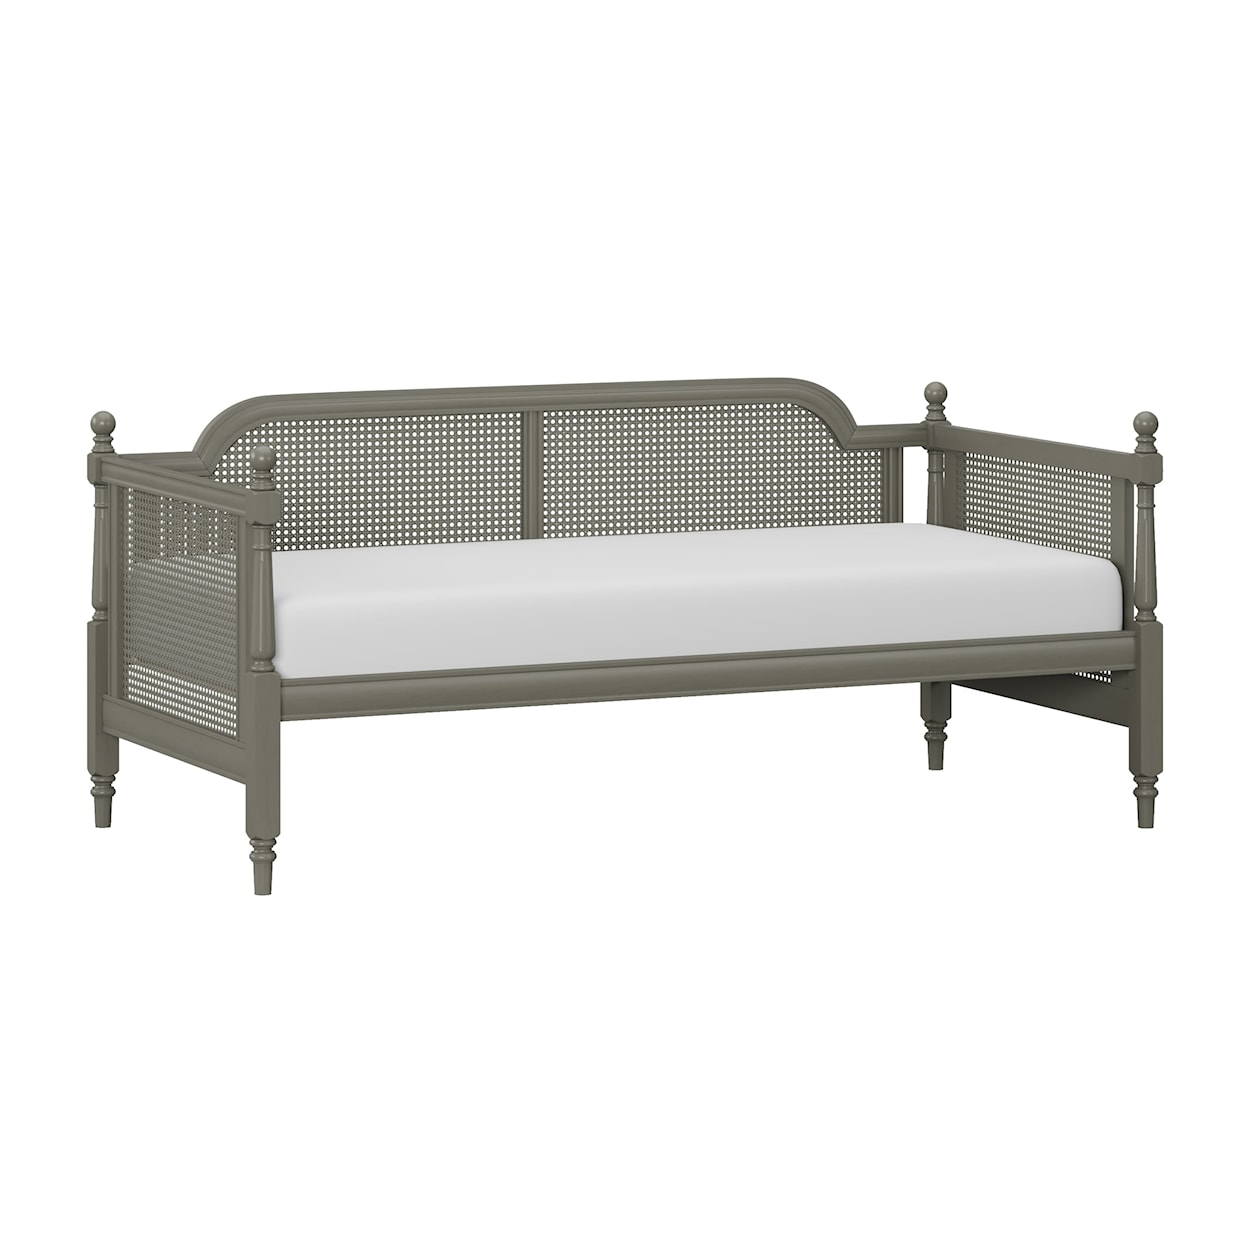 Hillsdale Melanie Wood and Cane Twin Daybed